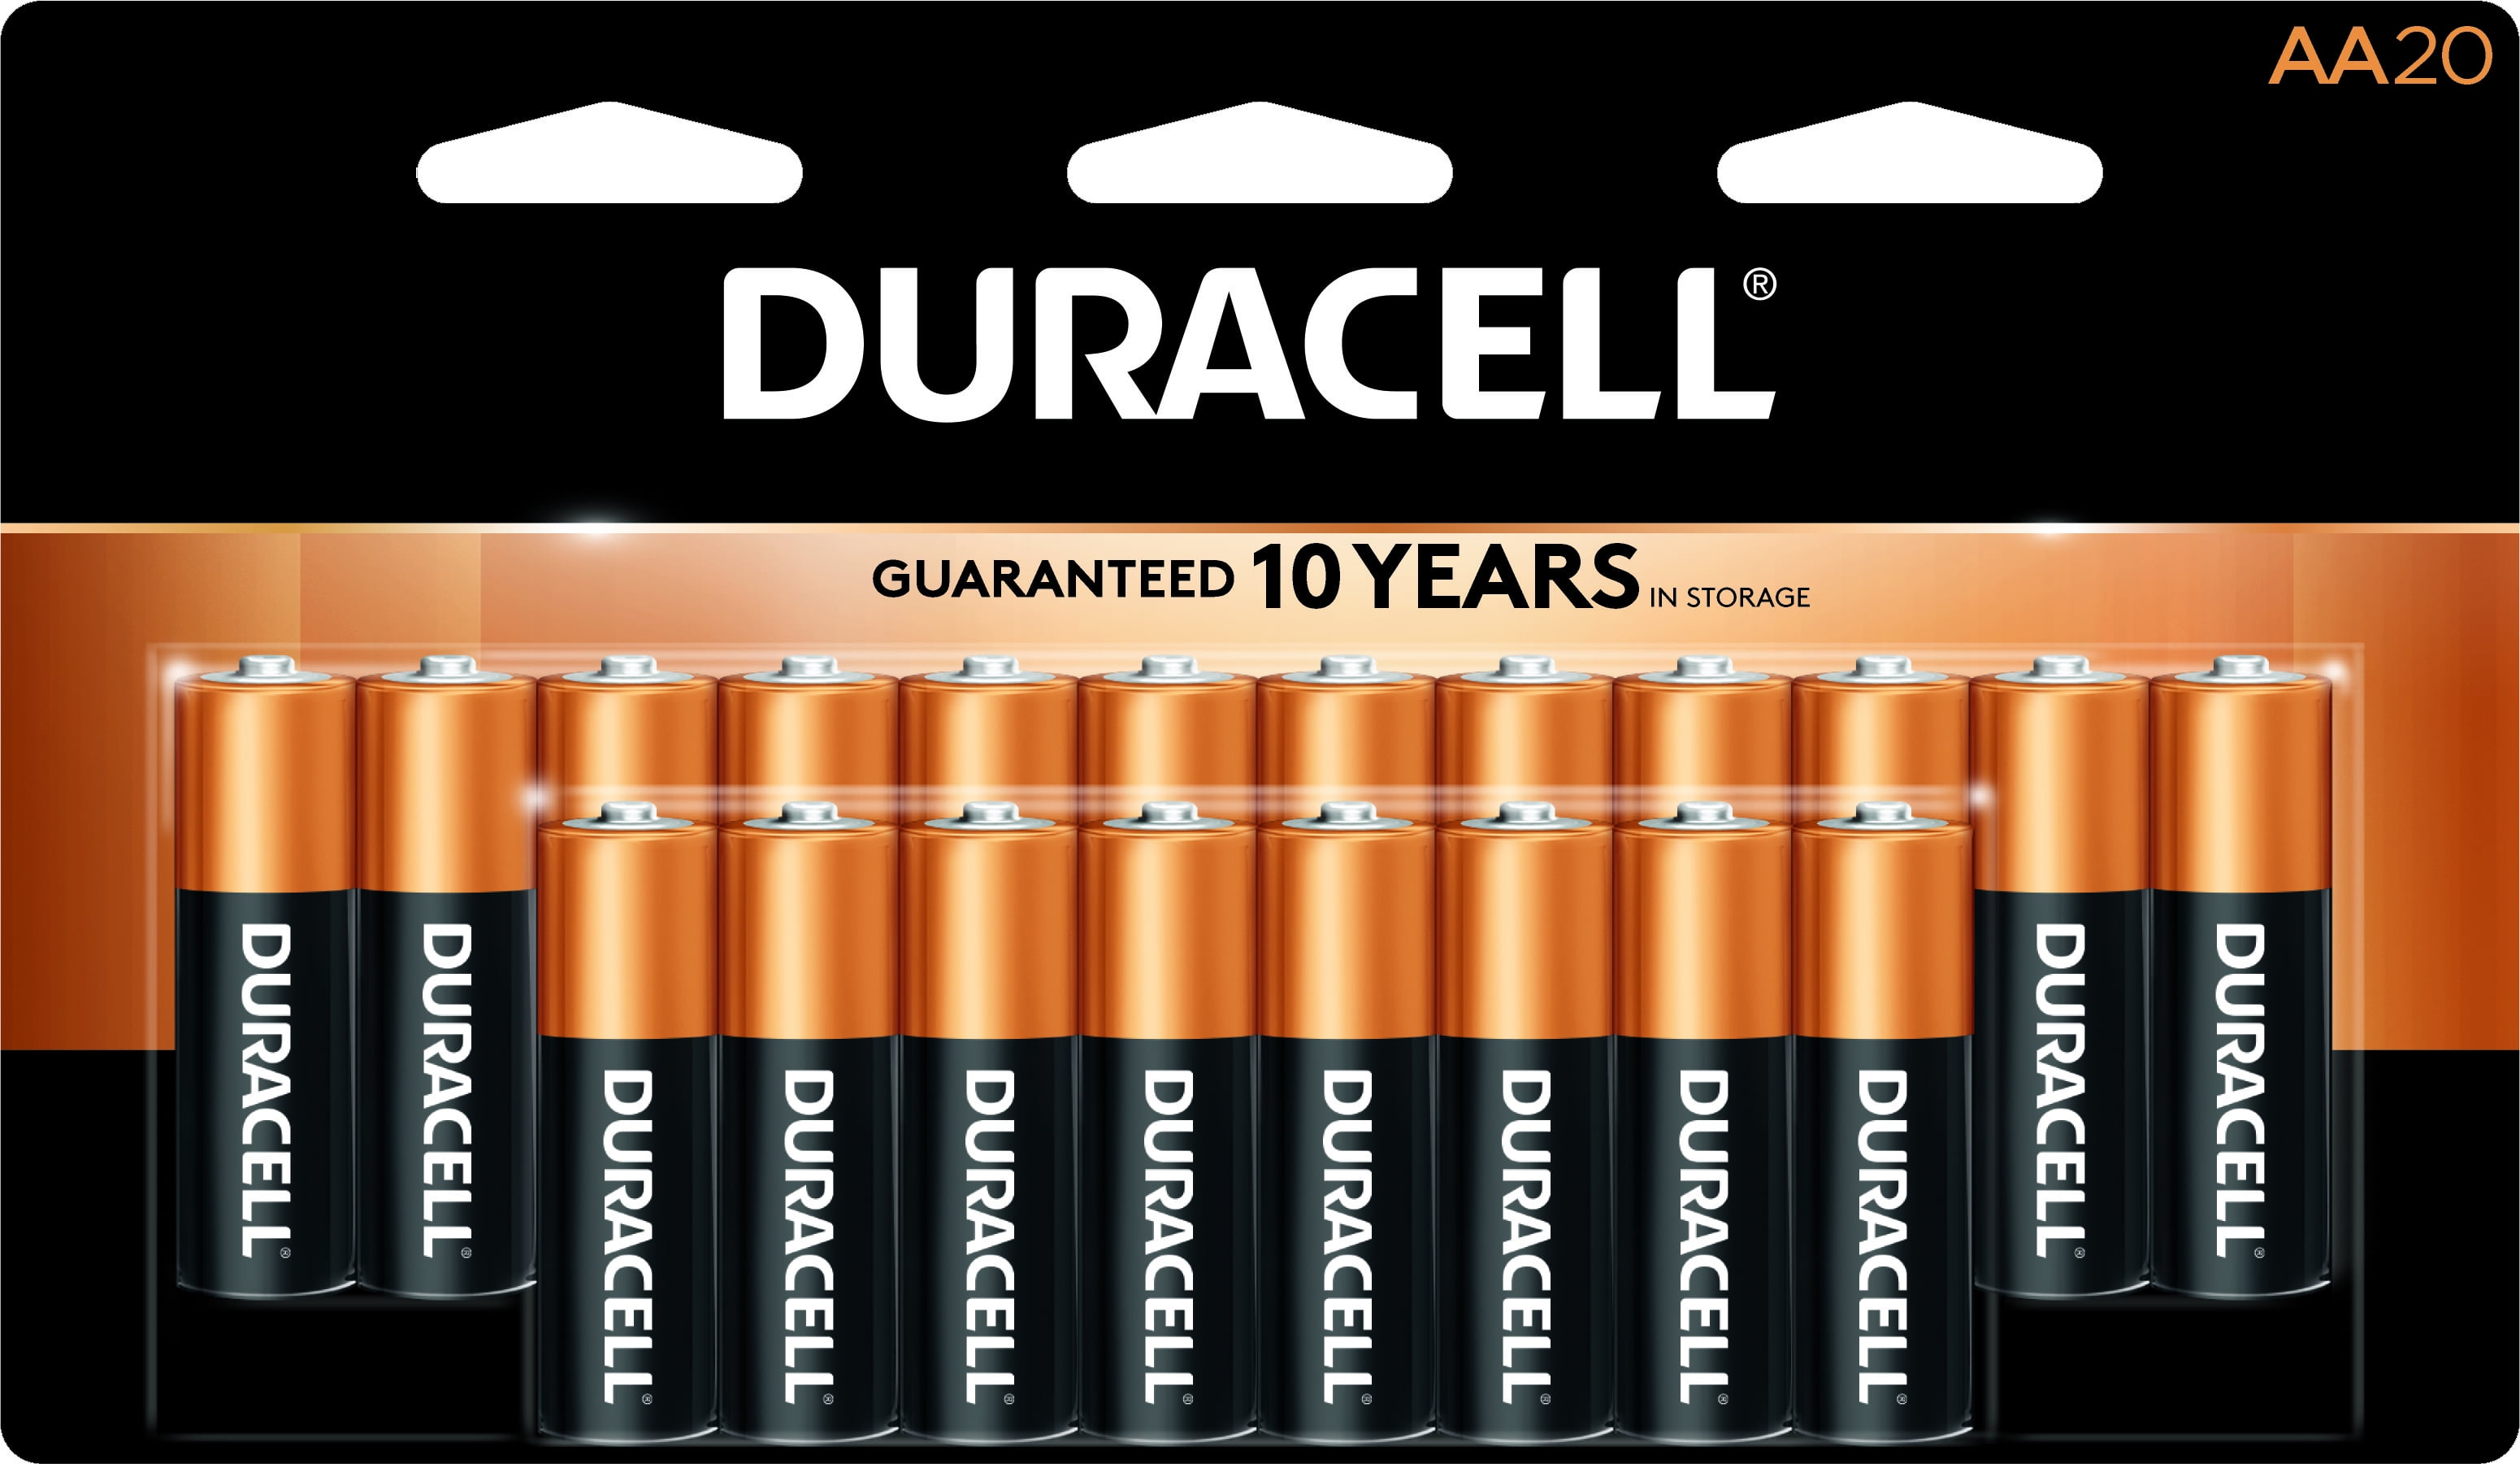 Duracell Coppertop AA Battery, Long Lasting Double A Batteries, 20 Pack